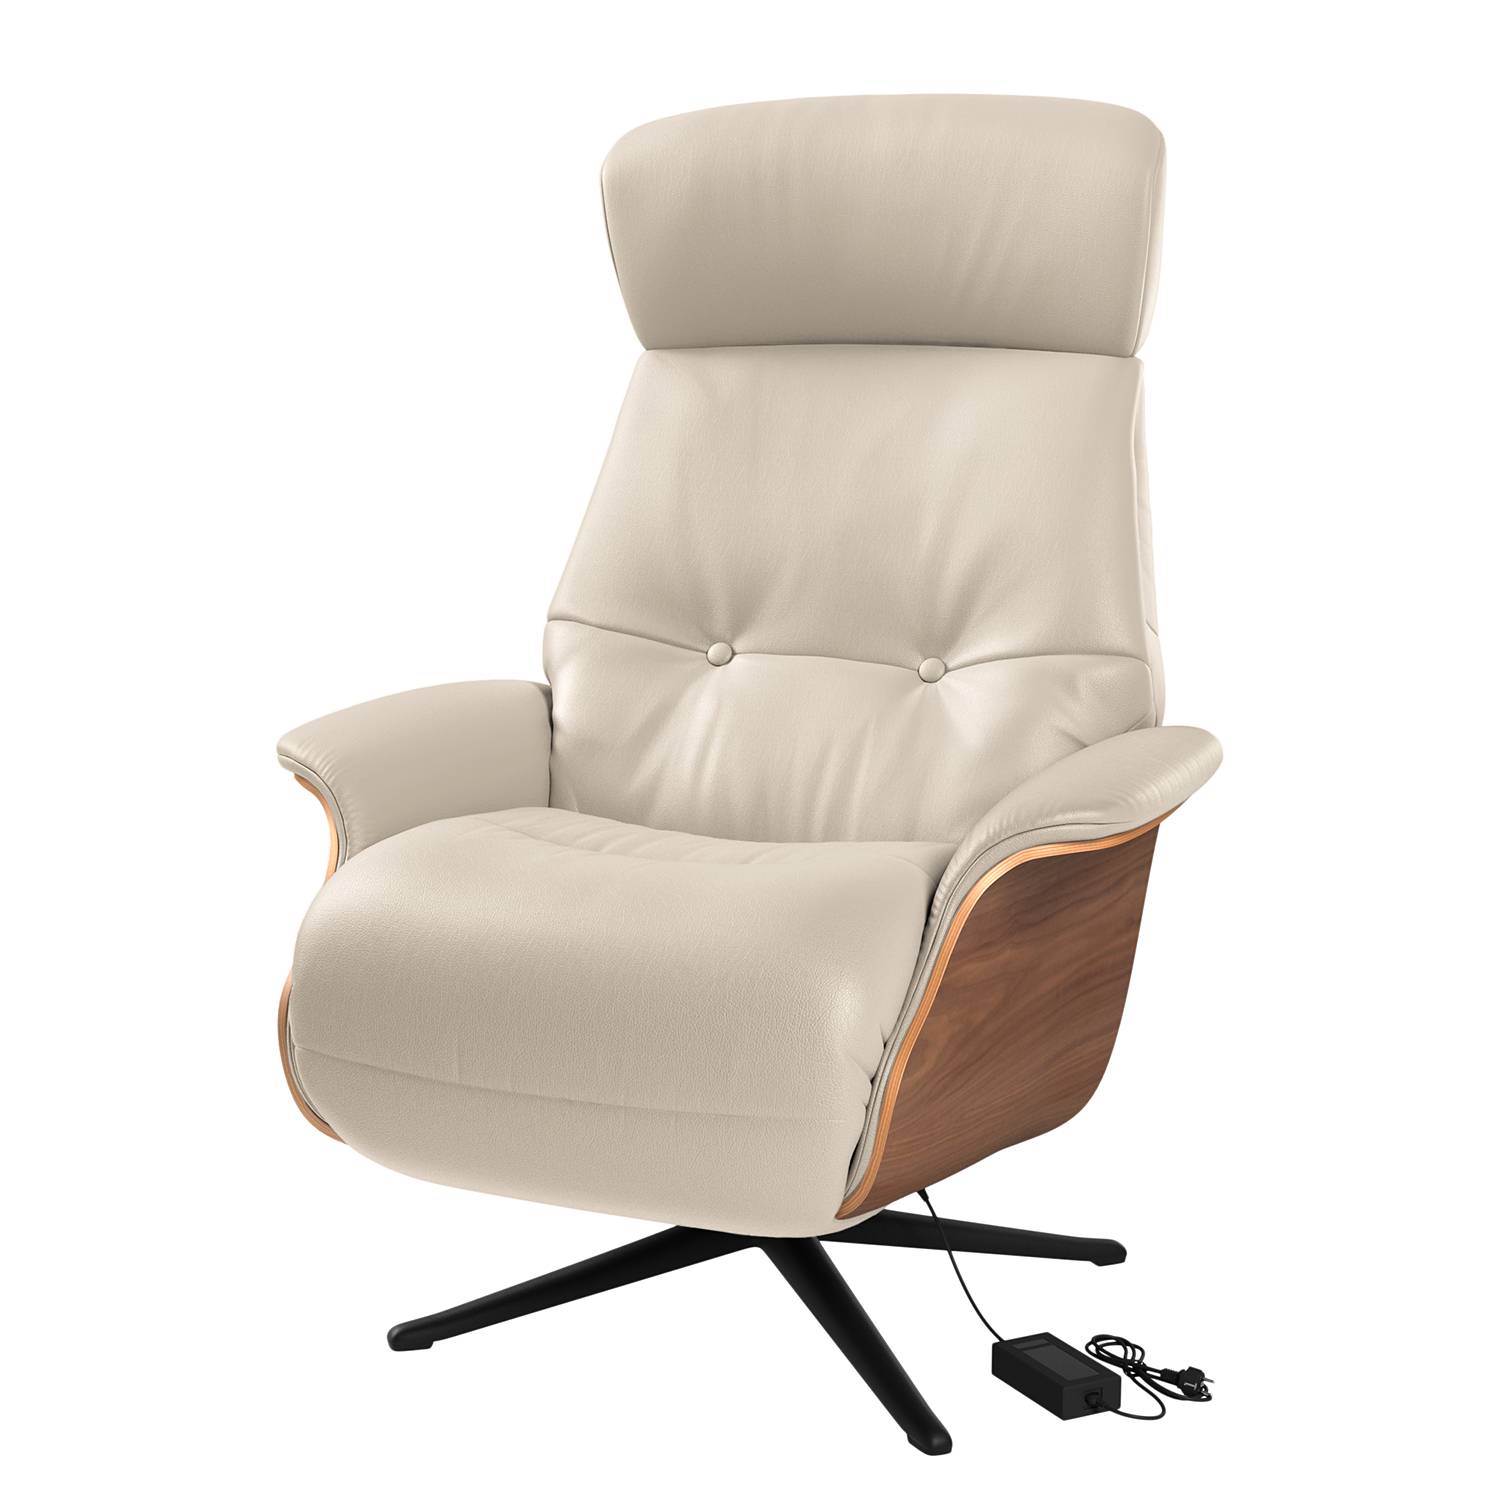 Image of Fauteuil relax Anderson VI 000000001000131401